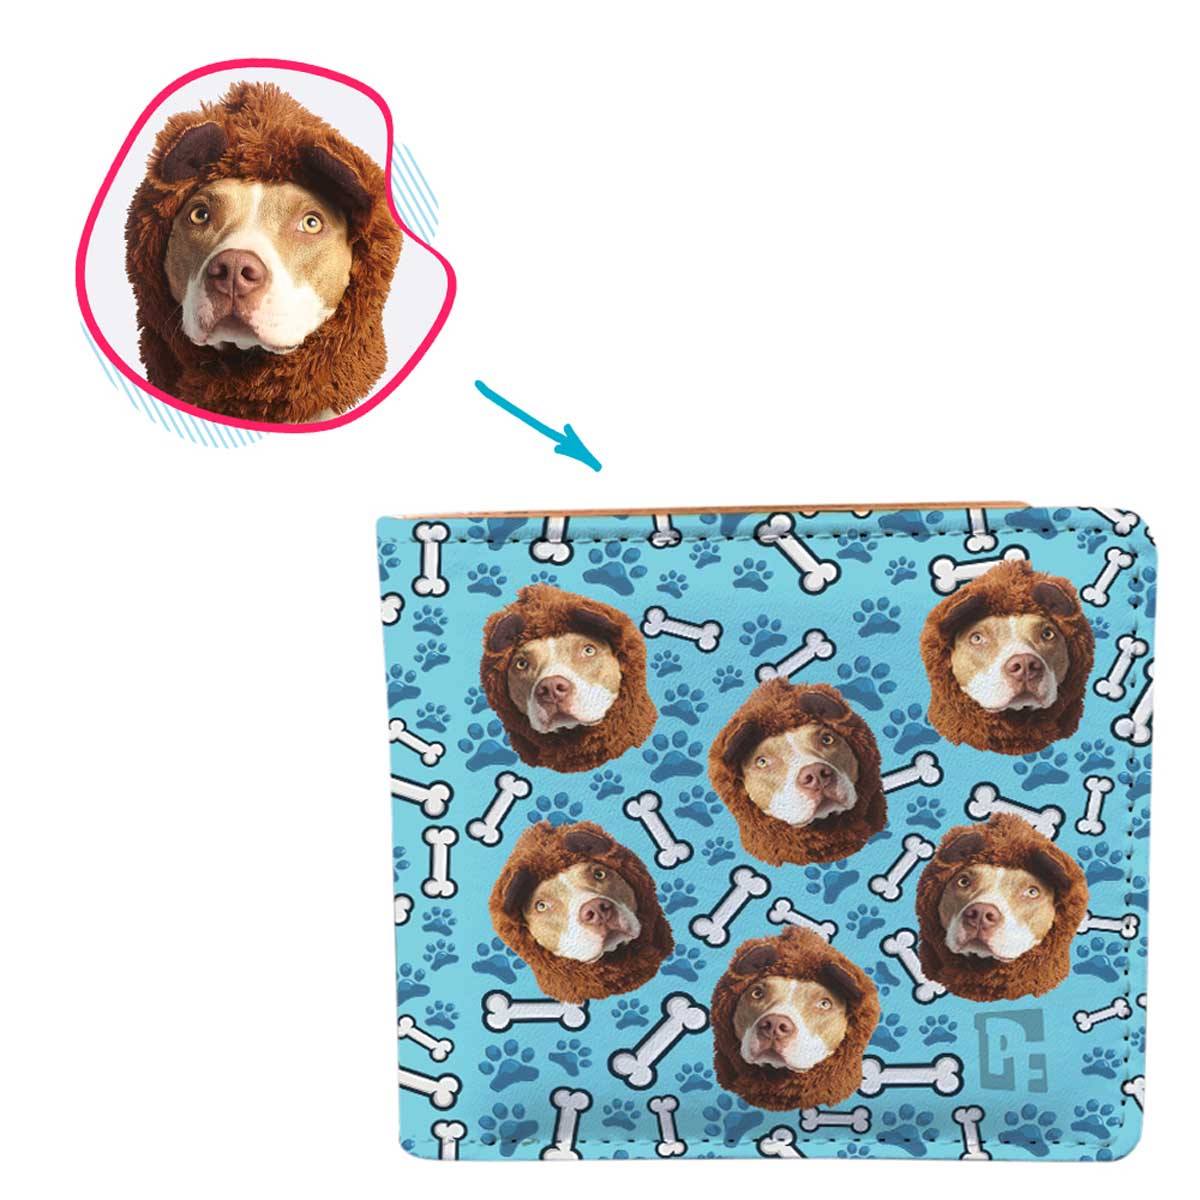 blue Dog wallet personalized with photo of face printed on it